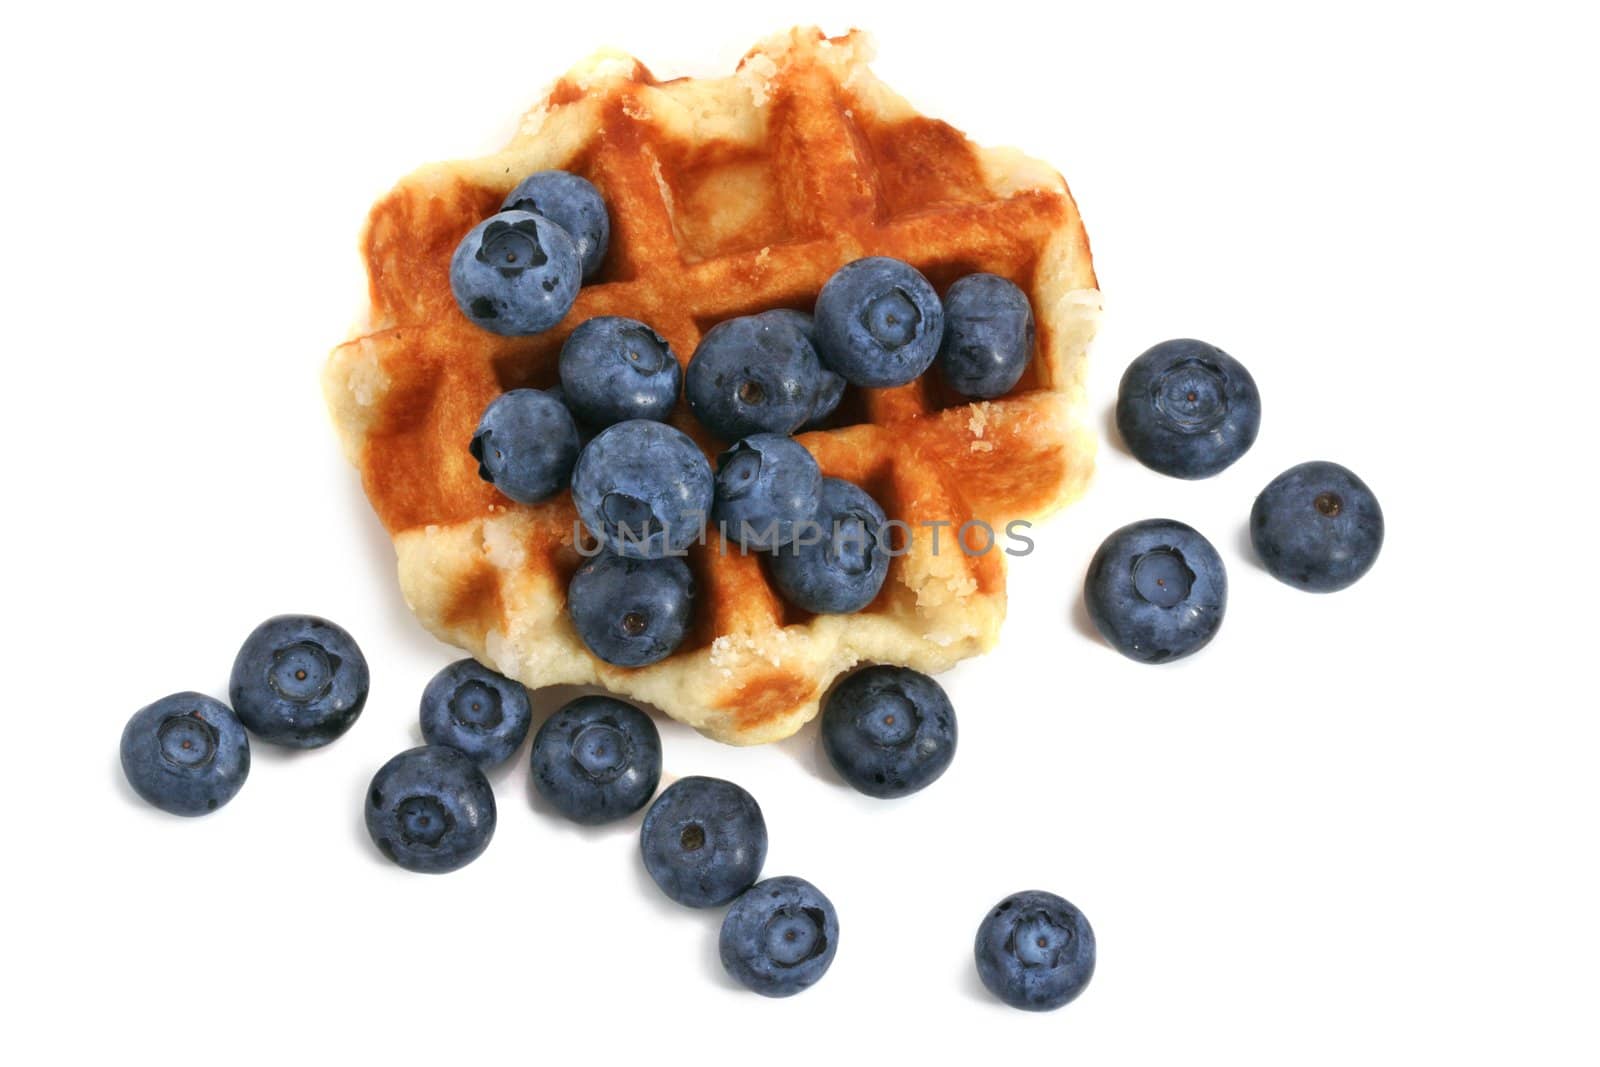 Belgian waffles with fresh blueberries, isolated on white